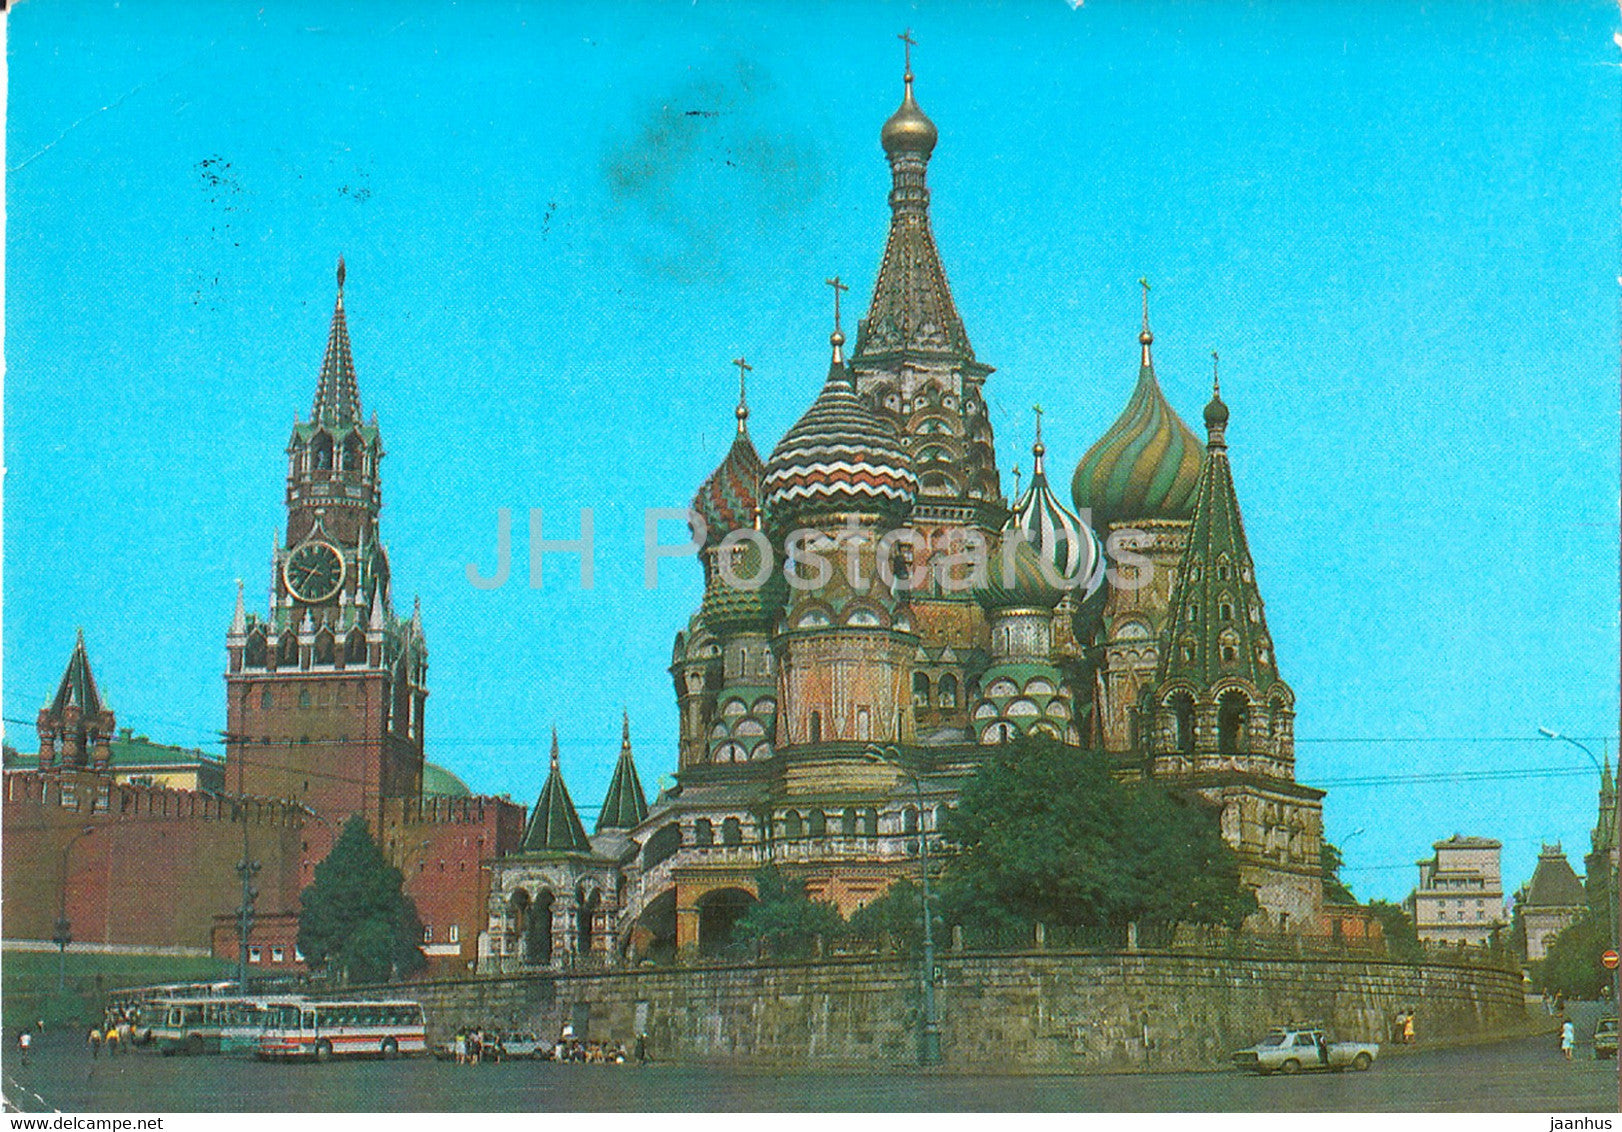 Moscow - Pokrovsky Cathedral - St. Basil's Cathedral - Spasskaya Tower - postal stationery - 1980 - Russia USSR - used - JH Postcards